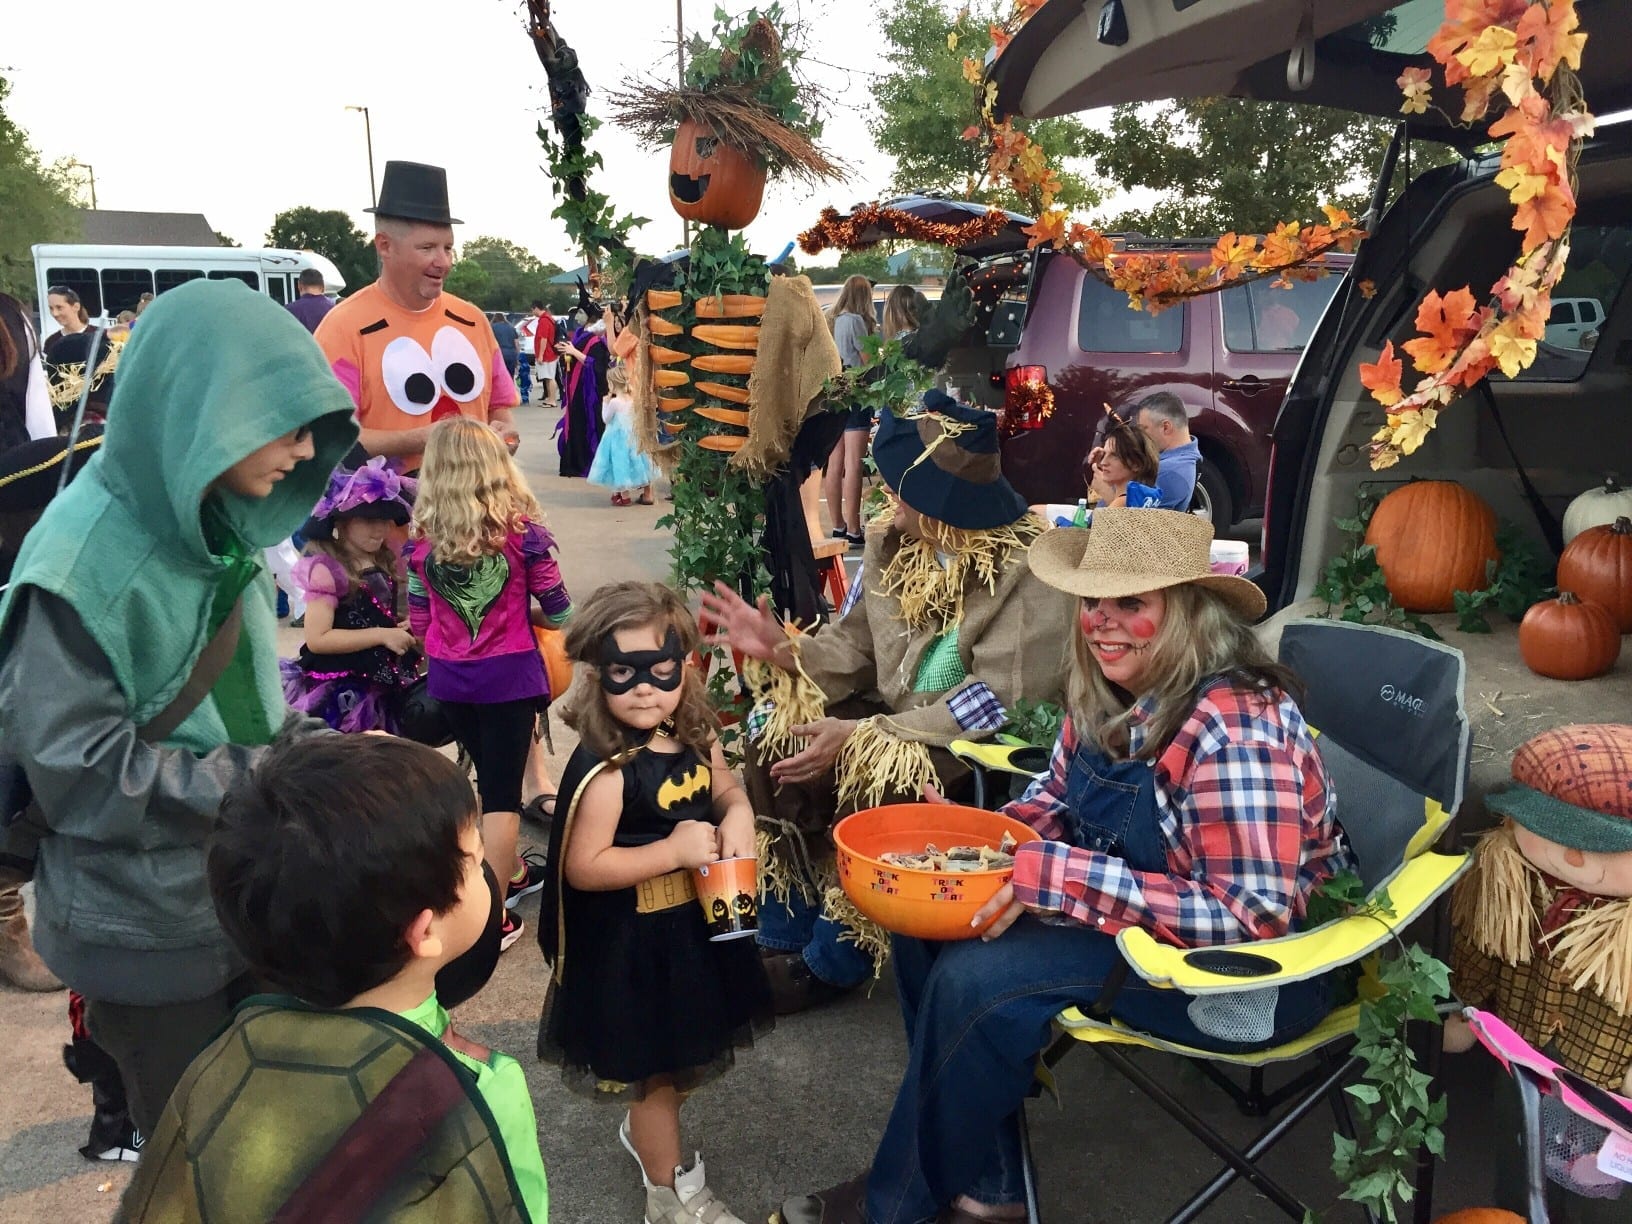 children receiving Halloween candy in costume at a Trunk or Treat event